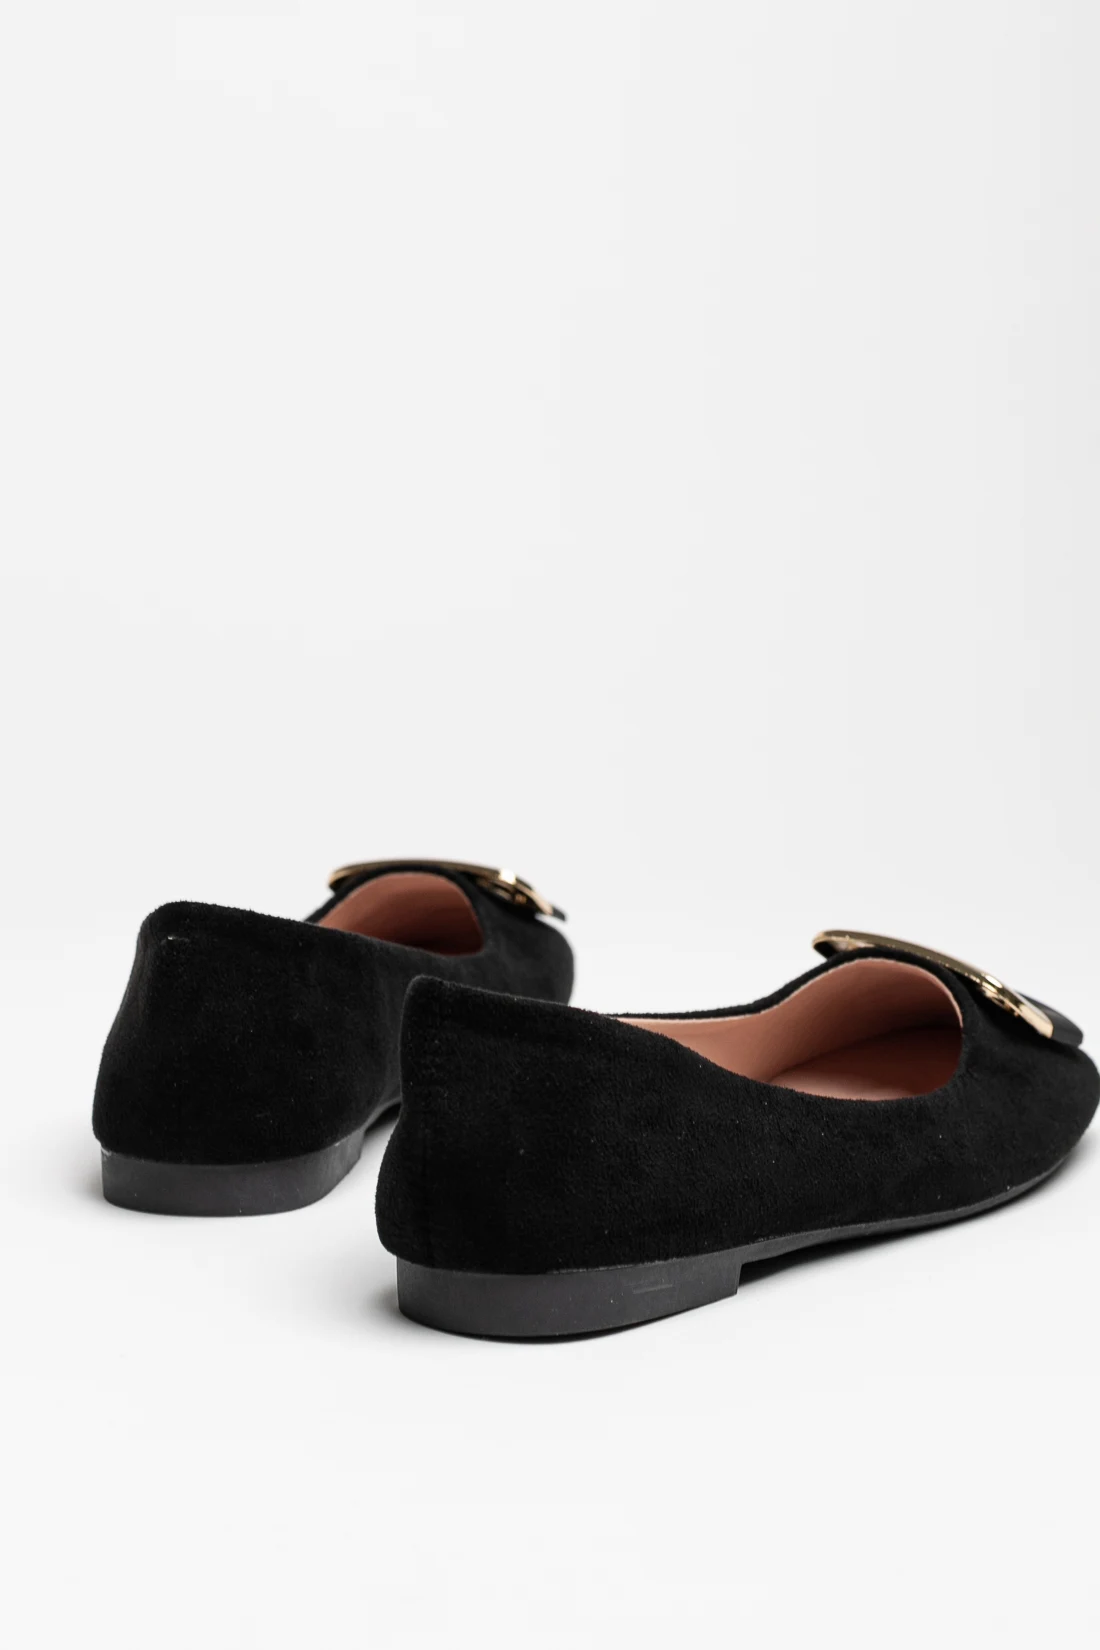 AMELY FLAT SHOES - BLACK